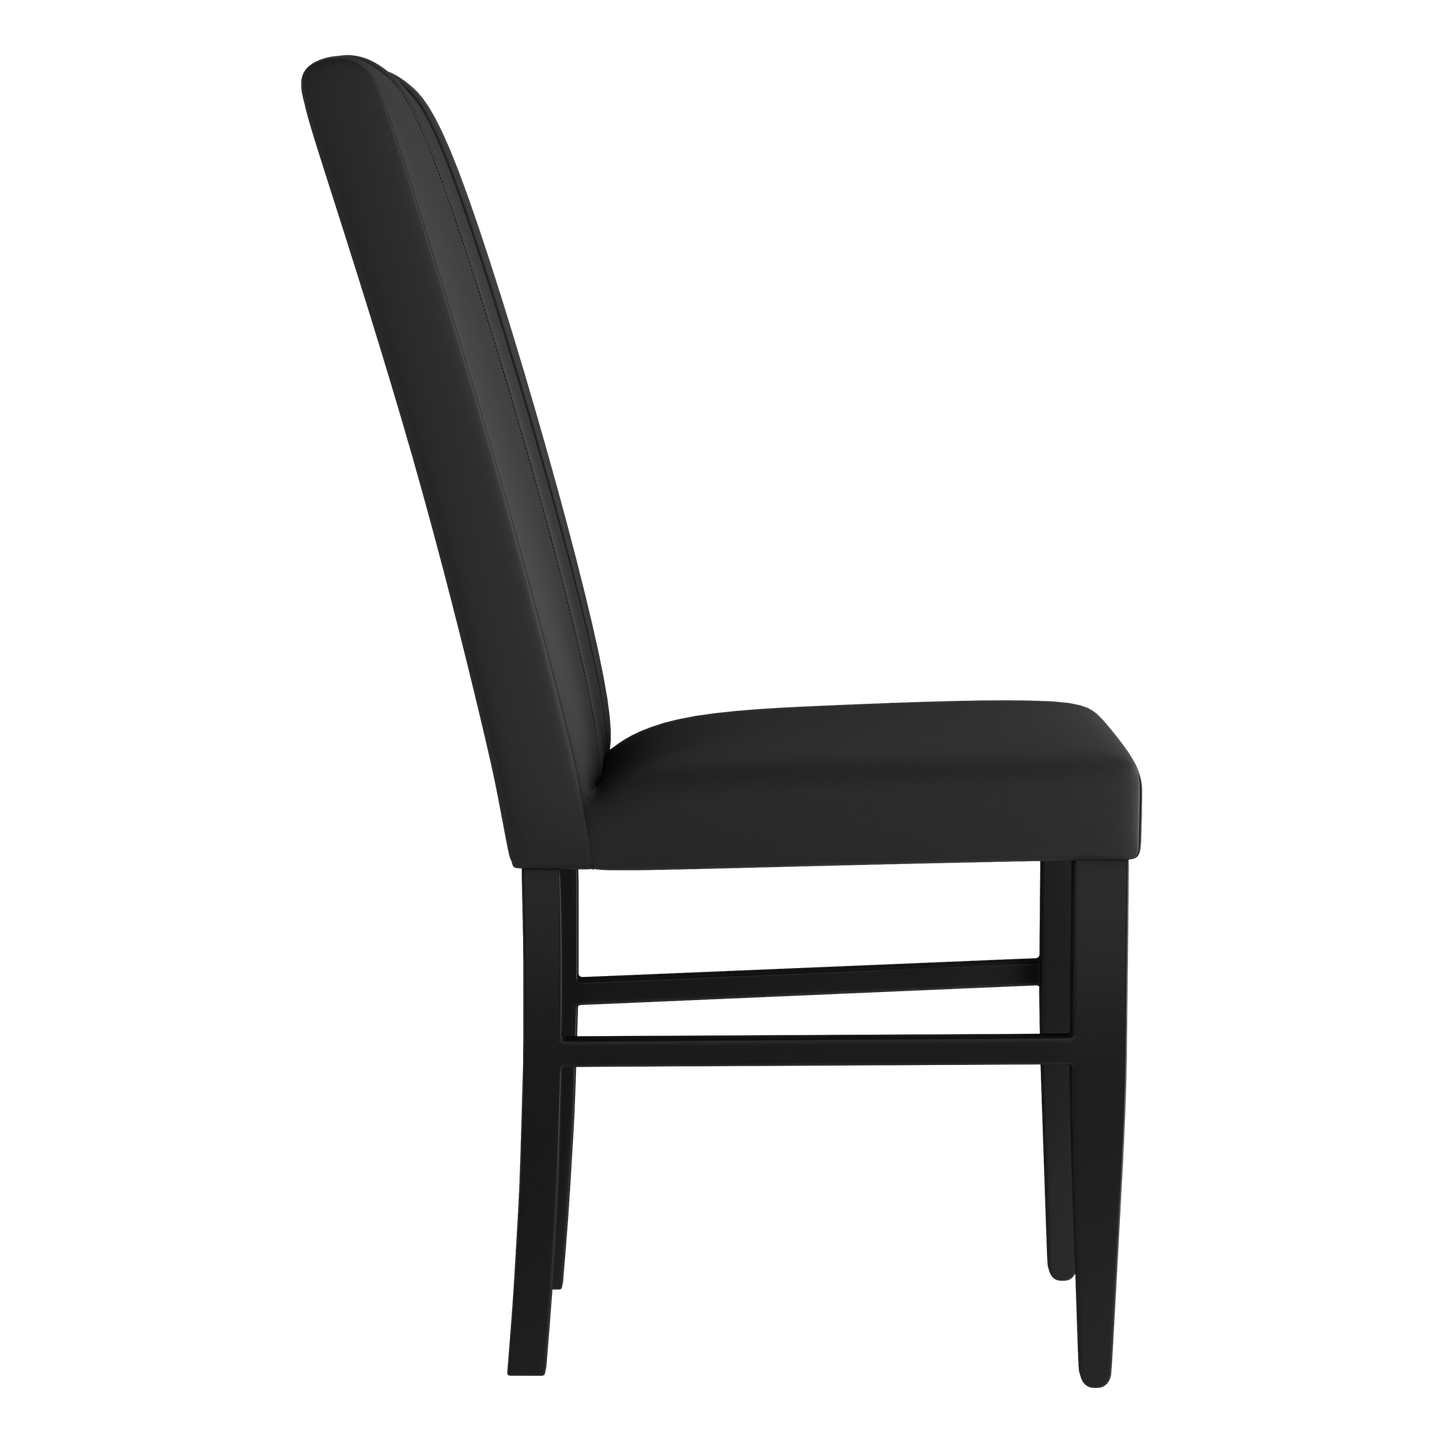 Side Chair 2000 with Georgetown Hoyas Alternate Set of 2